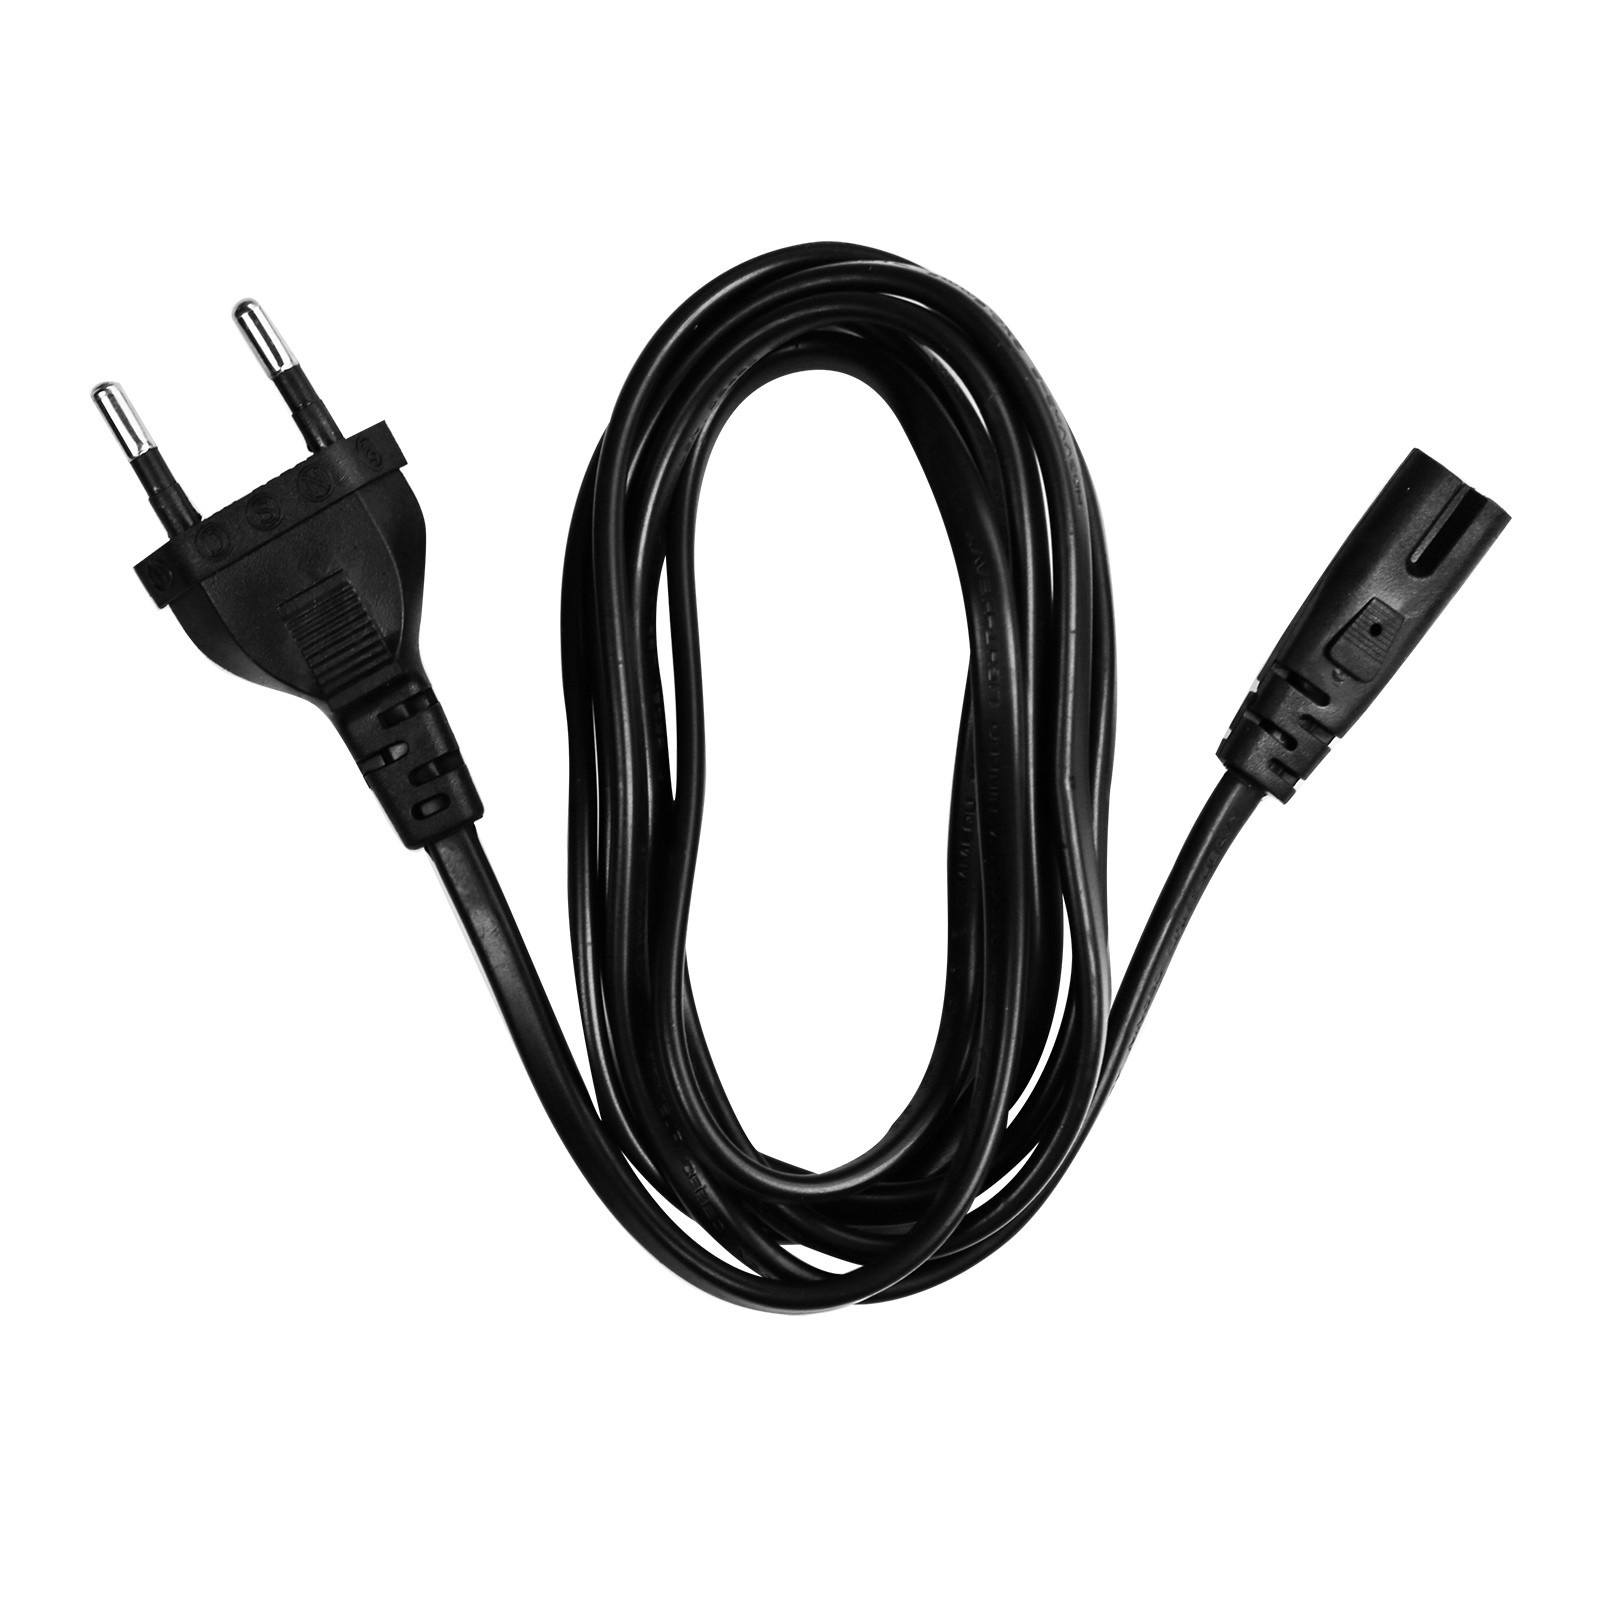 EKON HDMI V 1.4 cable male to mini HDMI male high speed with ethernet. OD 6.0mm.  Conductor pure copper,30 AWG, jacket black color. Connector PVC black  color and gold plated. Shielding: Al-foil with Alumium  braid ( Double shielding). Total Lenght 1,8  mt